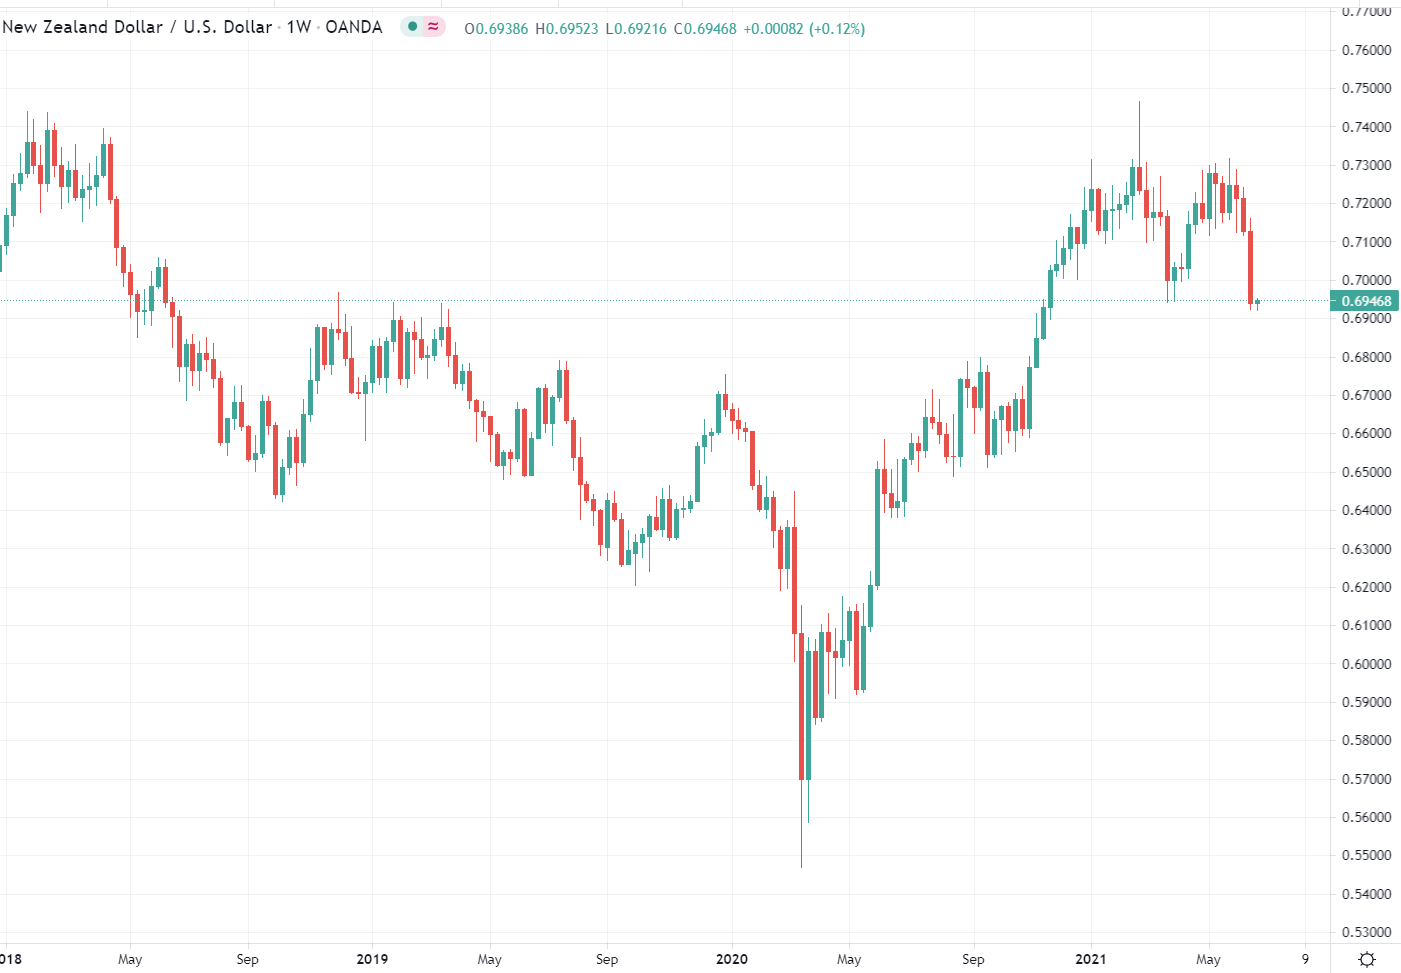 nzd/usd weekly candle chart June 2021